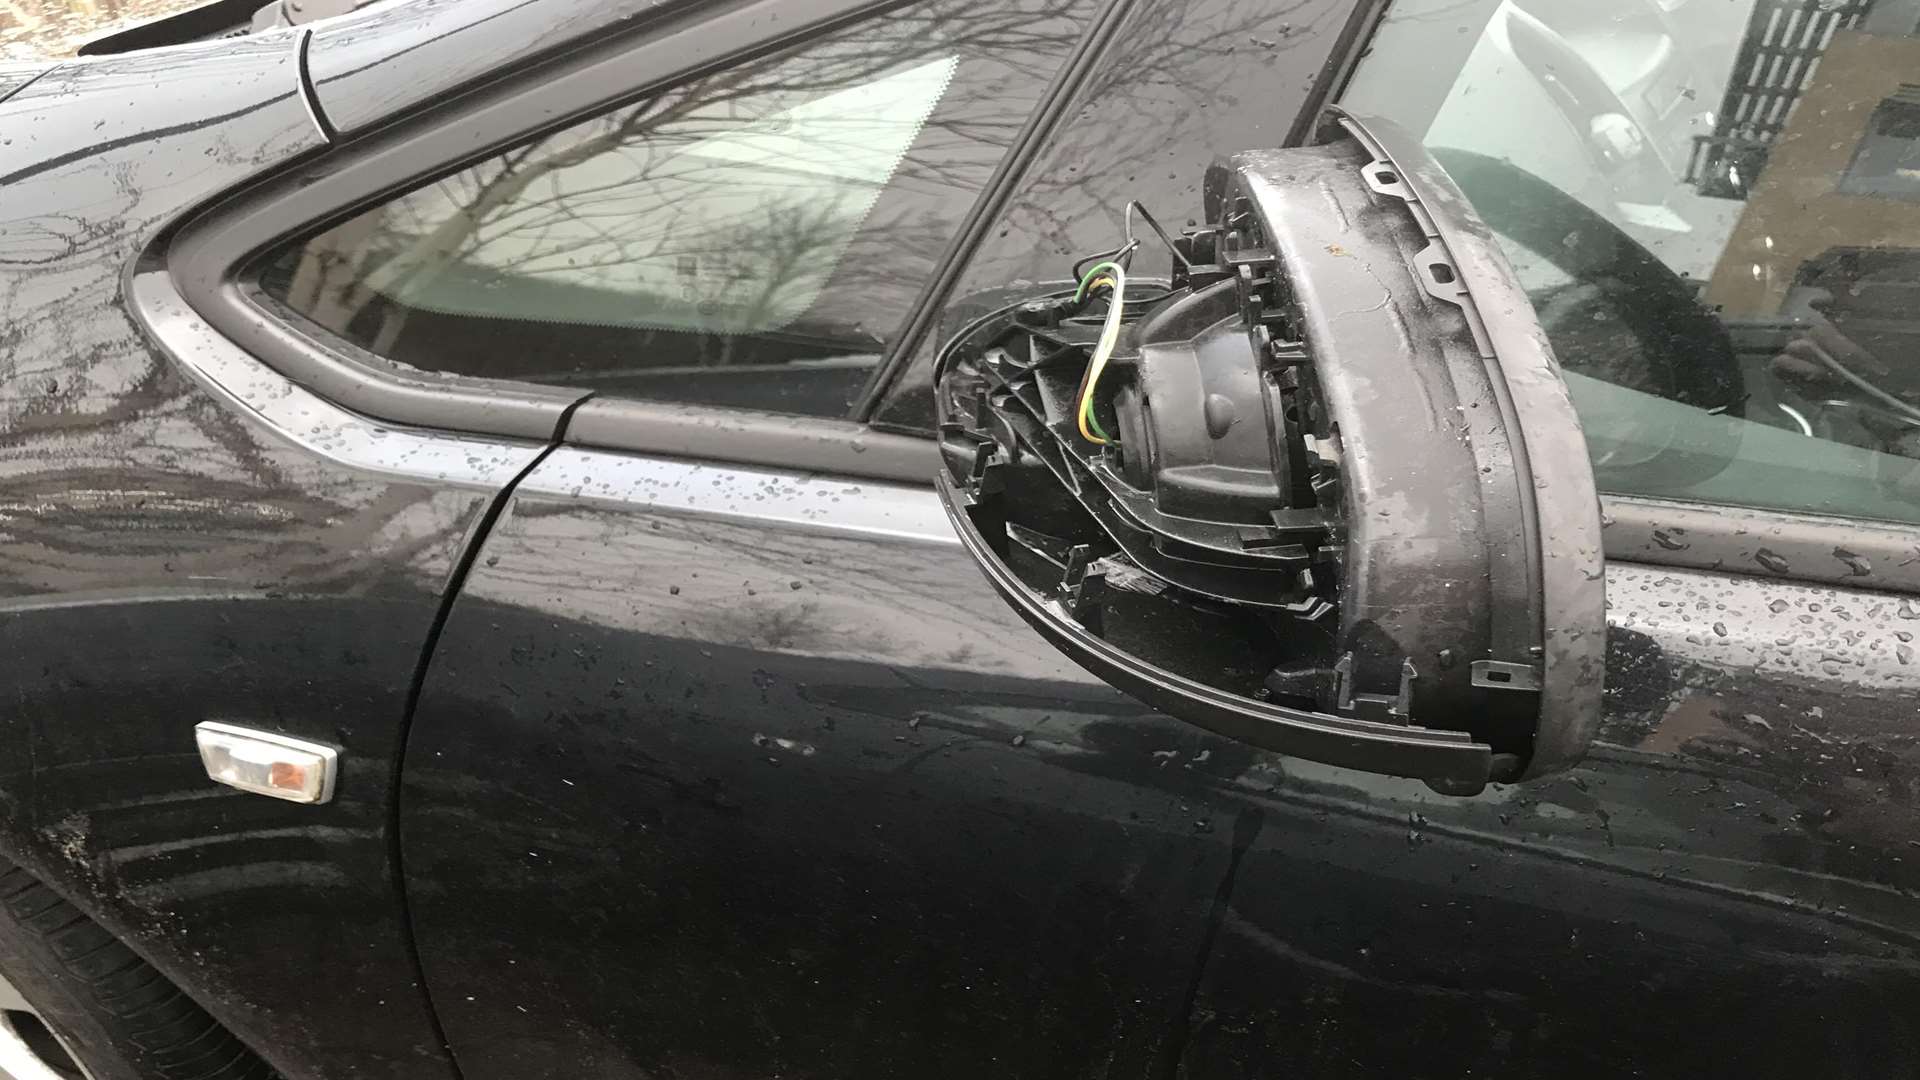 Damage to the car's wing mirror made moving the car more difficult